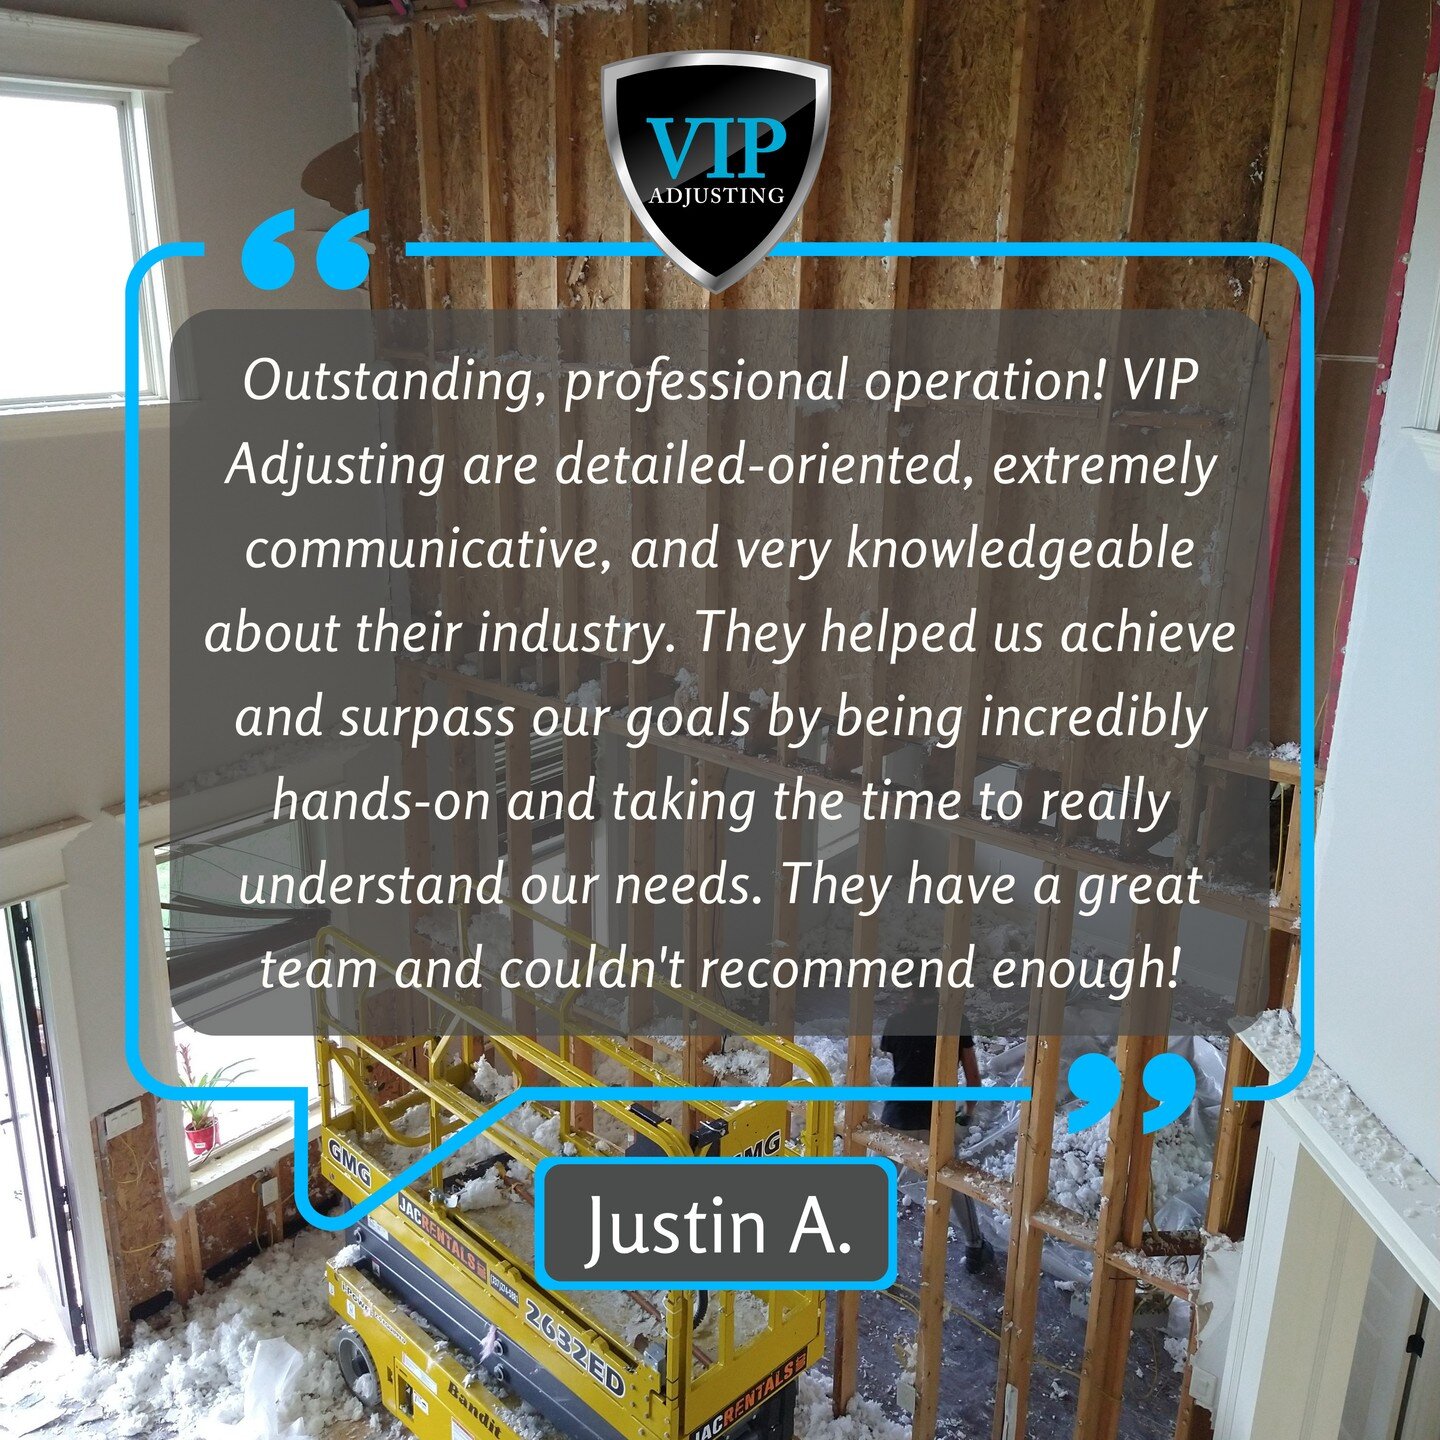 It's reactions like this that motivate us so thank you Justin for the kind words! As Public Adjusters our number one priority is to help policy holders to ensure that they are properly compensated for their damages. 

If you have any questions about 